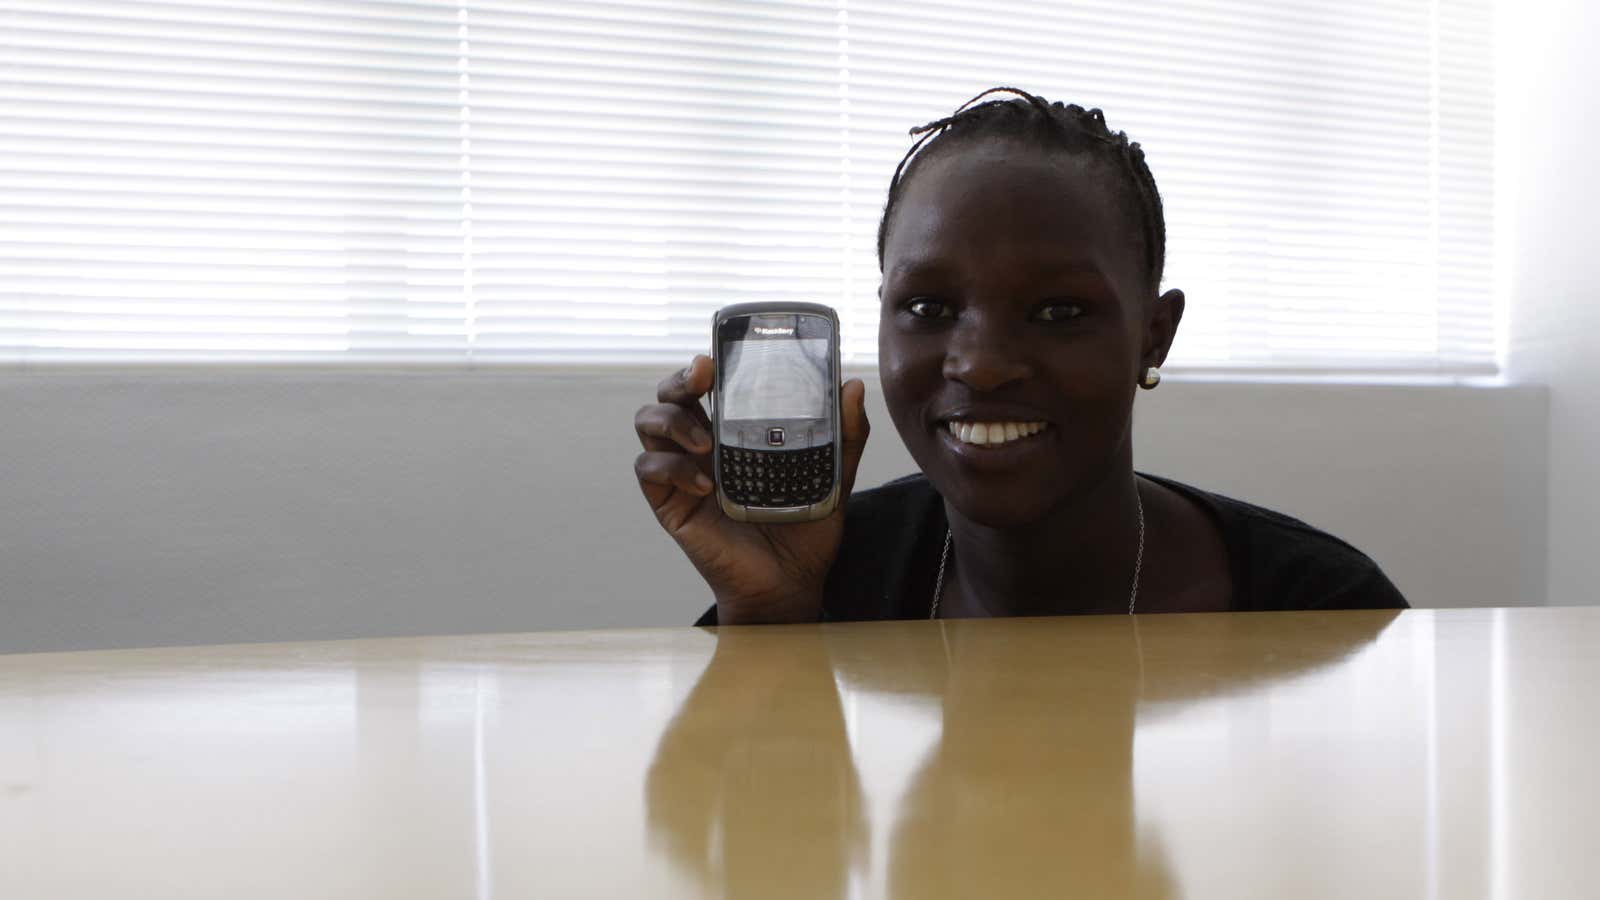 The BlackBerry is still a popular device in South Africa. But for how much longer?